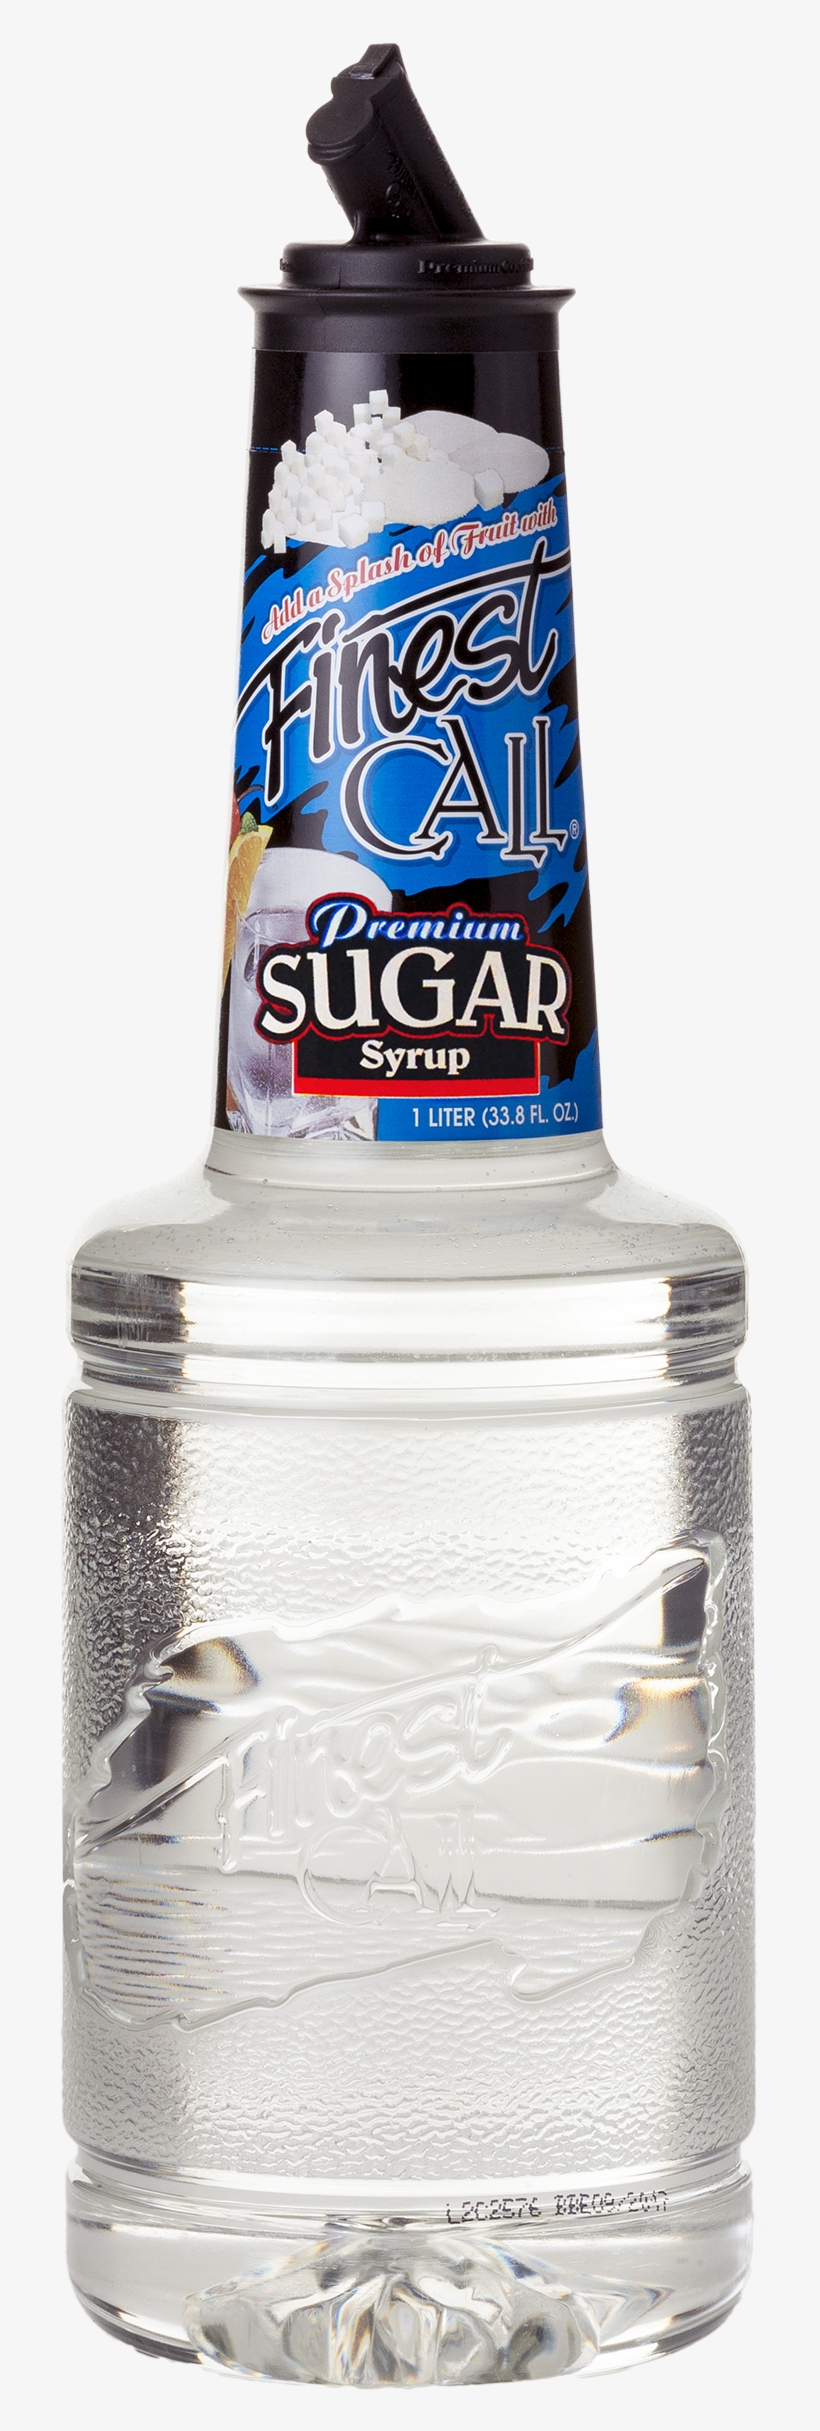 Check Out Other Recipes Using - Finest Call Sugar Syrup, transparent png #1761269